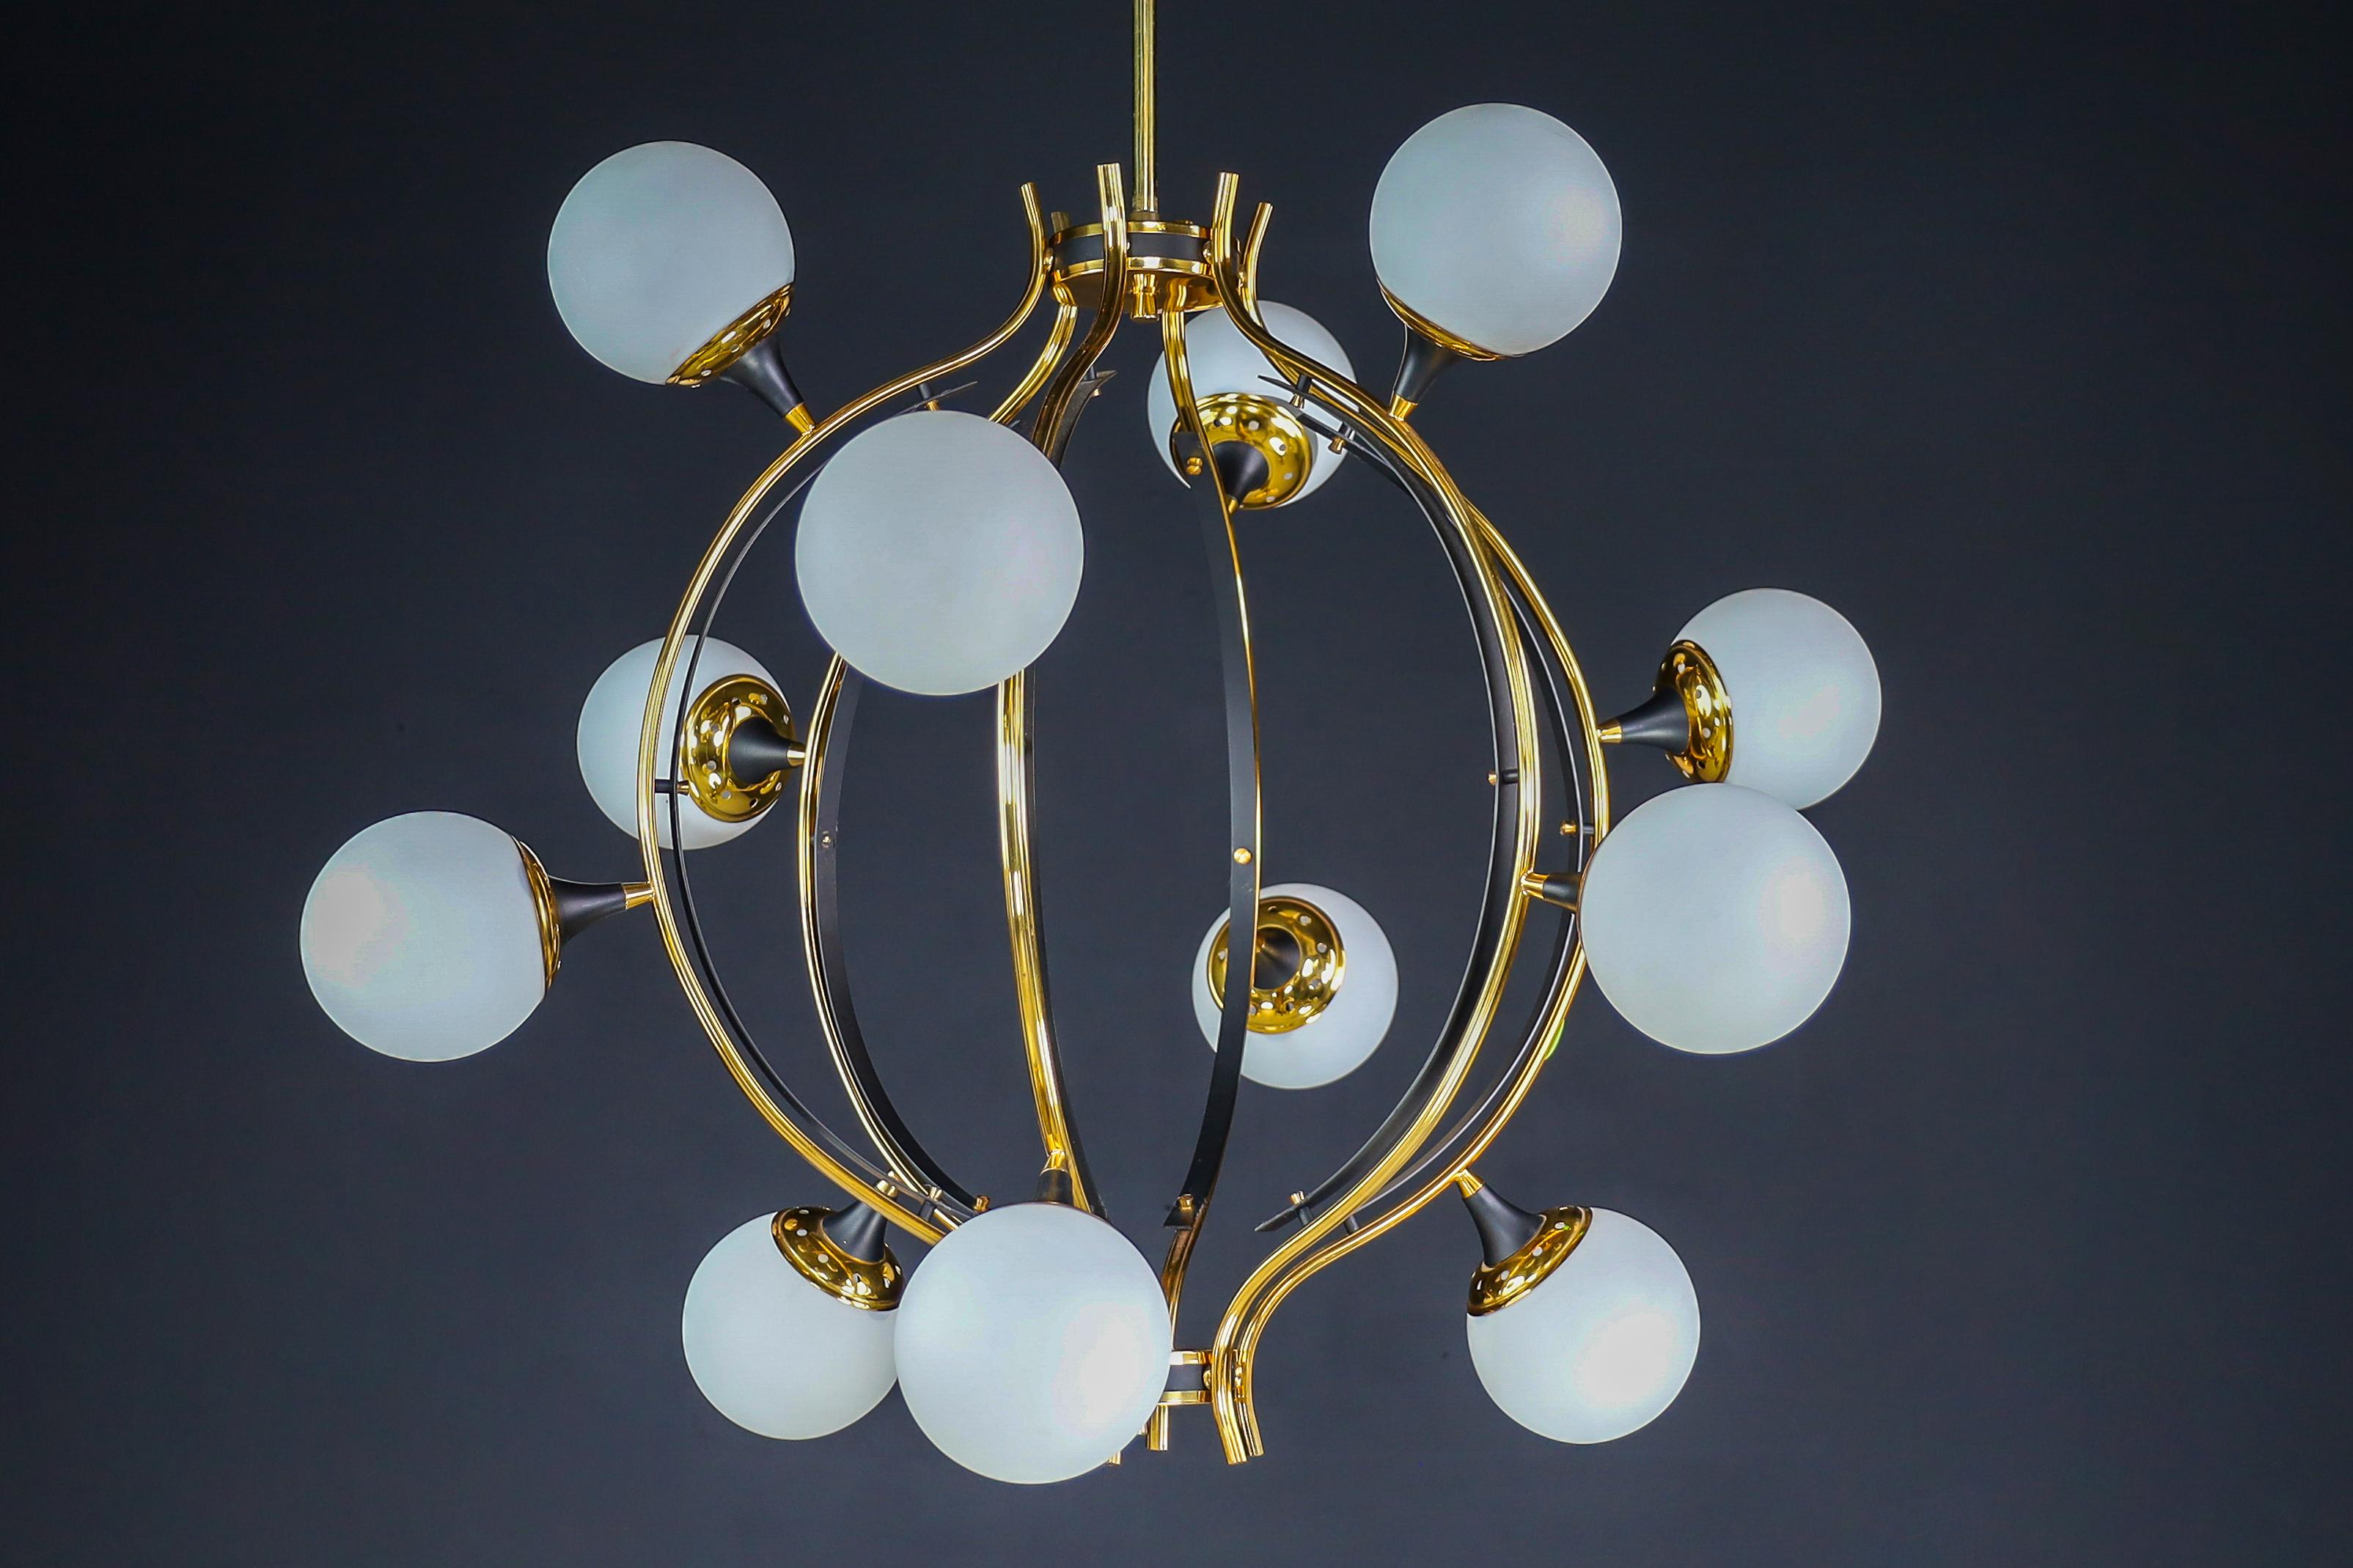 Mid-Century Stilnovo Chandelier in Brass and 12 opaline globes, Italy 1950s

This midcentury Italian brass chandelier by Stilnovo features 12 handblown opaline glass globes of exceptional quality. The soft globes diffuse light beautifully,